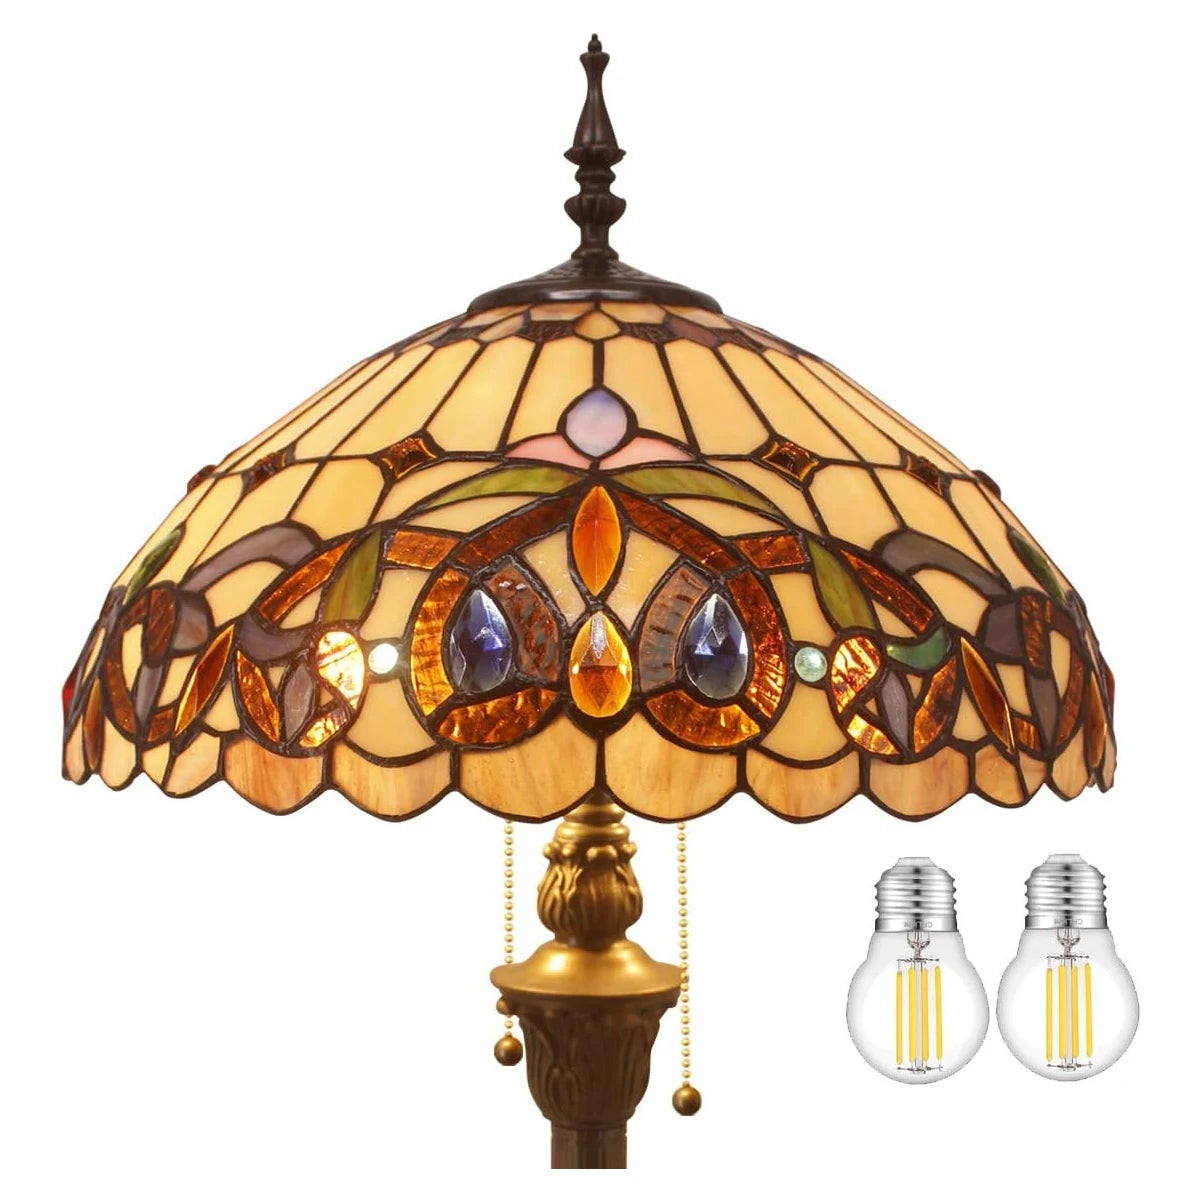 Tiffany Floor Lamp Serenity Victorian Stained Glass